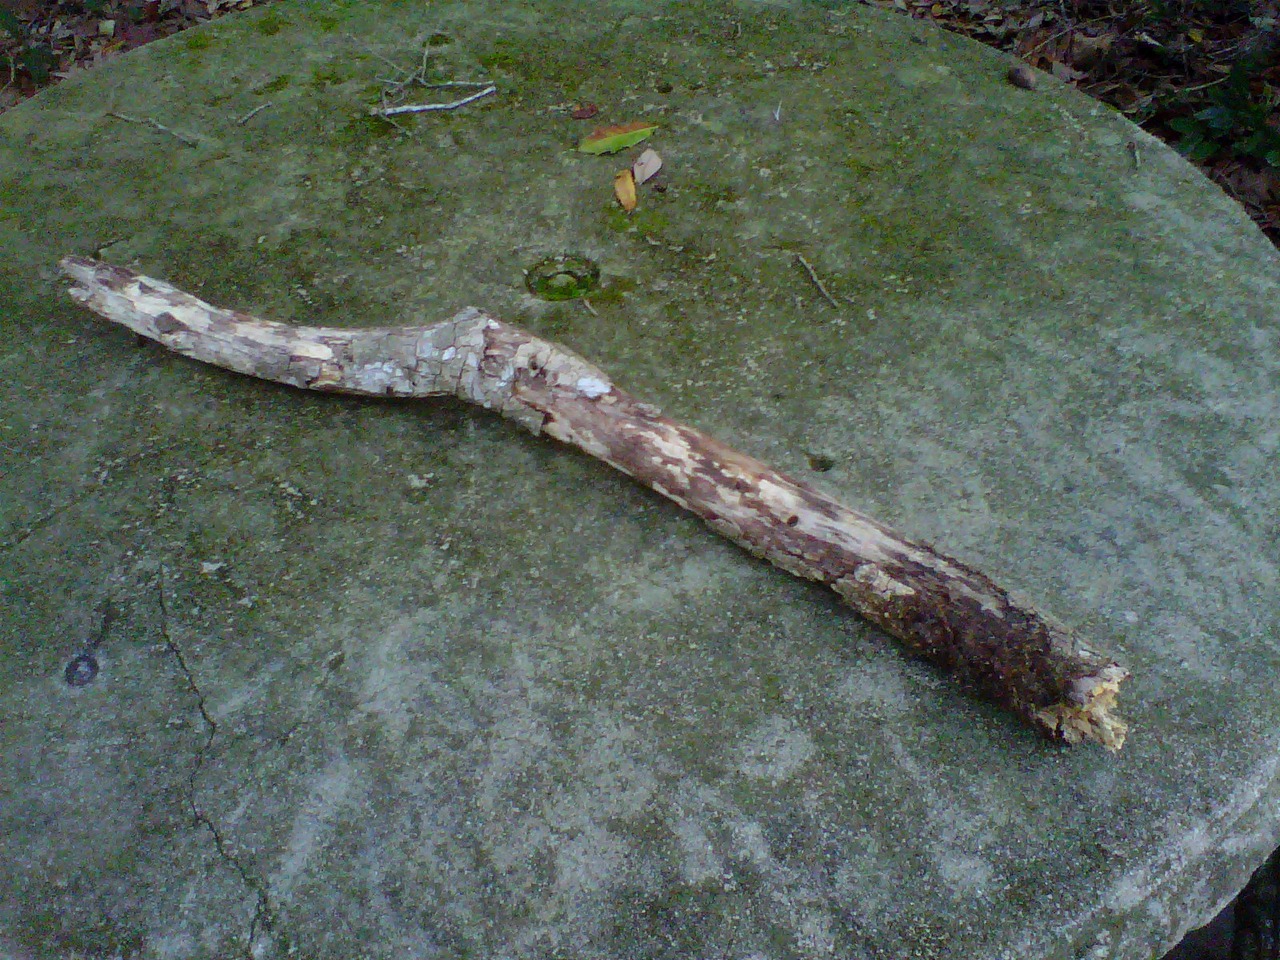 This tree branch came down on my head today in a wind gust.